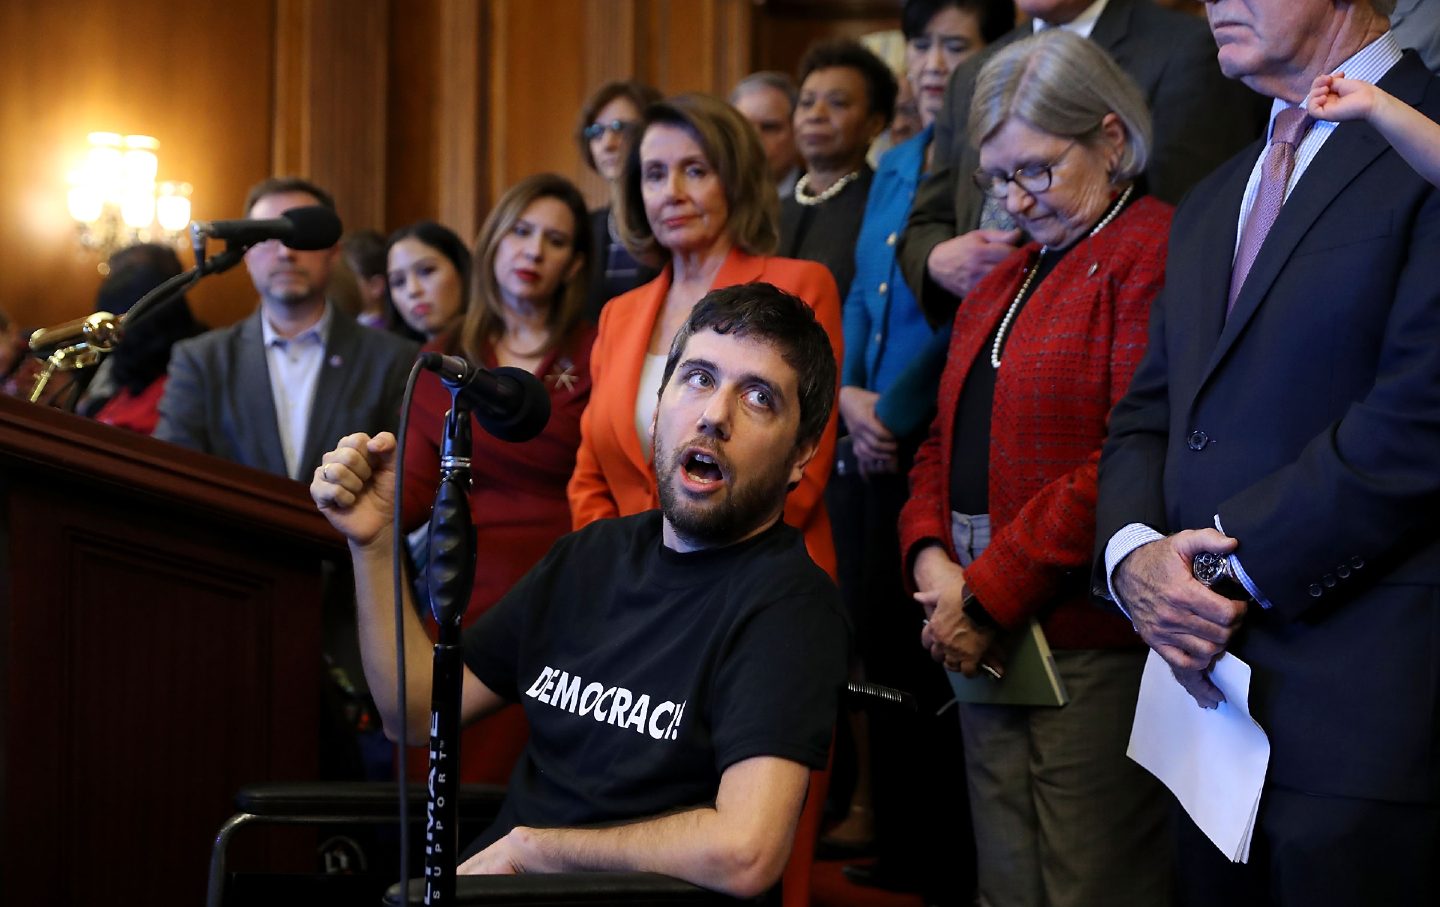 Ady Barkan (C) delivers remarks during a rally organized by House minority leader Nancy Pelosi (D-Calif.) at the US Capitol,December 19, 2017.